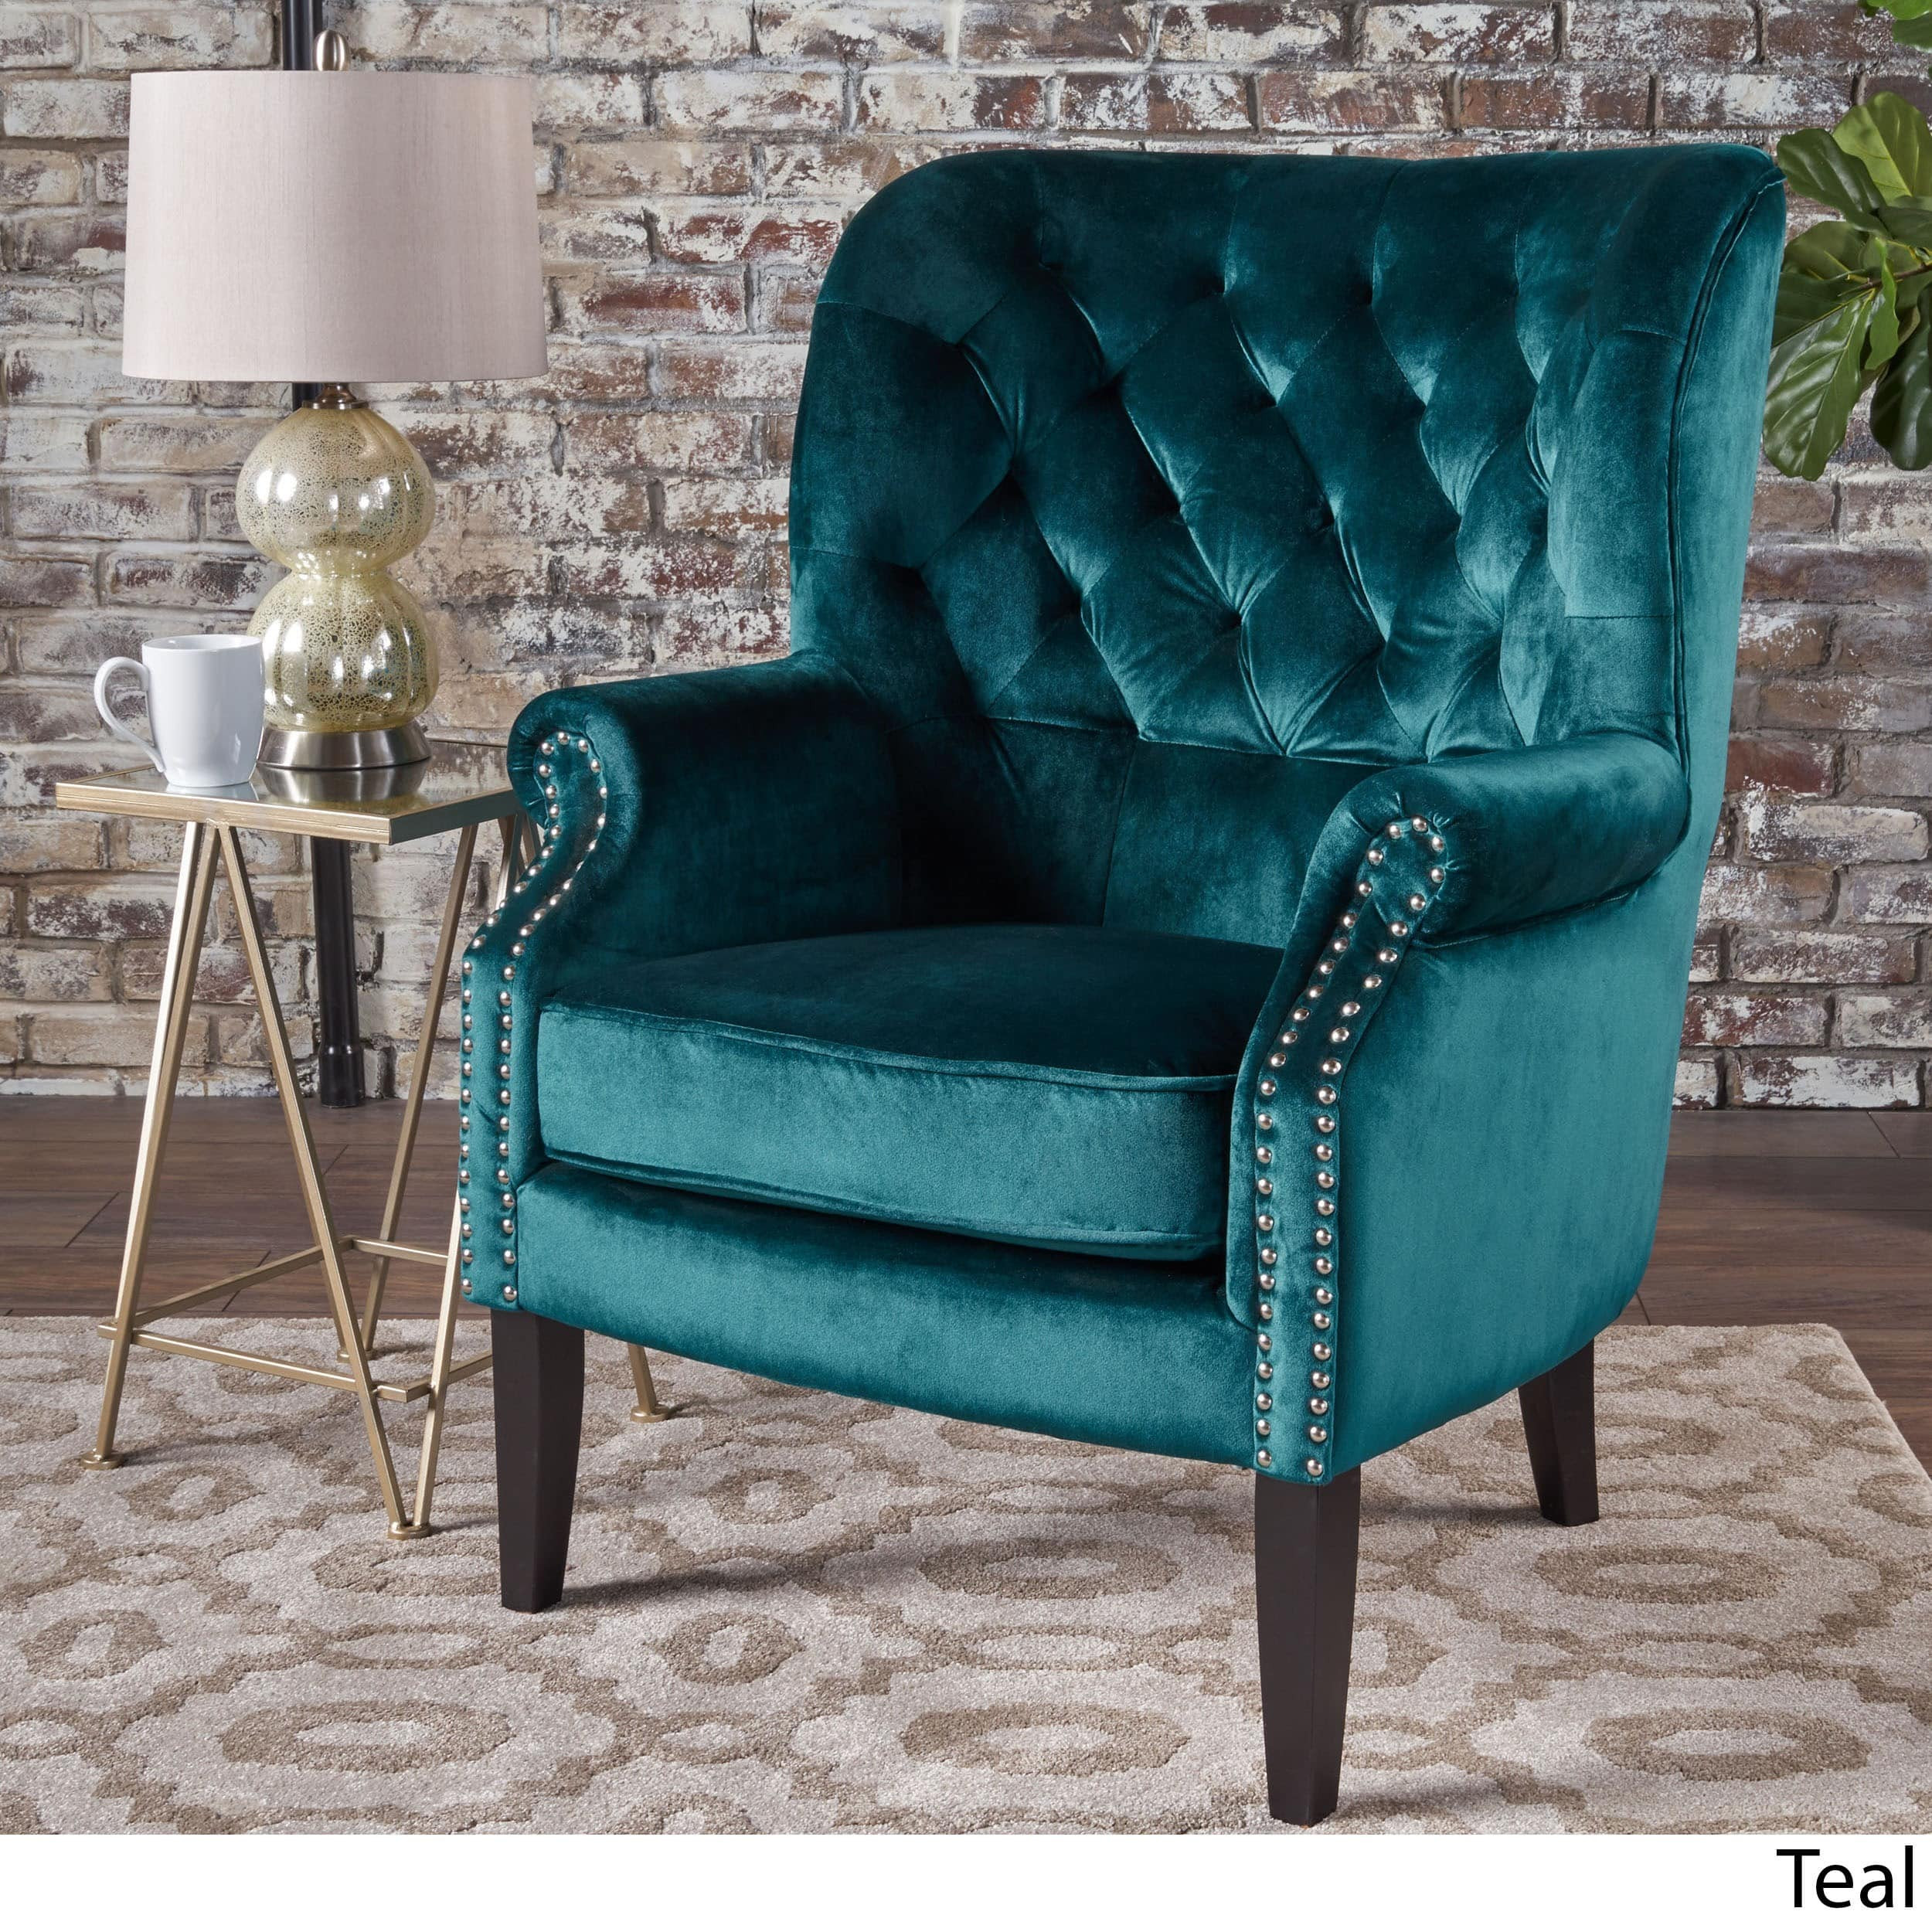 Teal Living Room Chair
 Overstock line Shopping Bedding Furniture